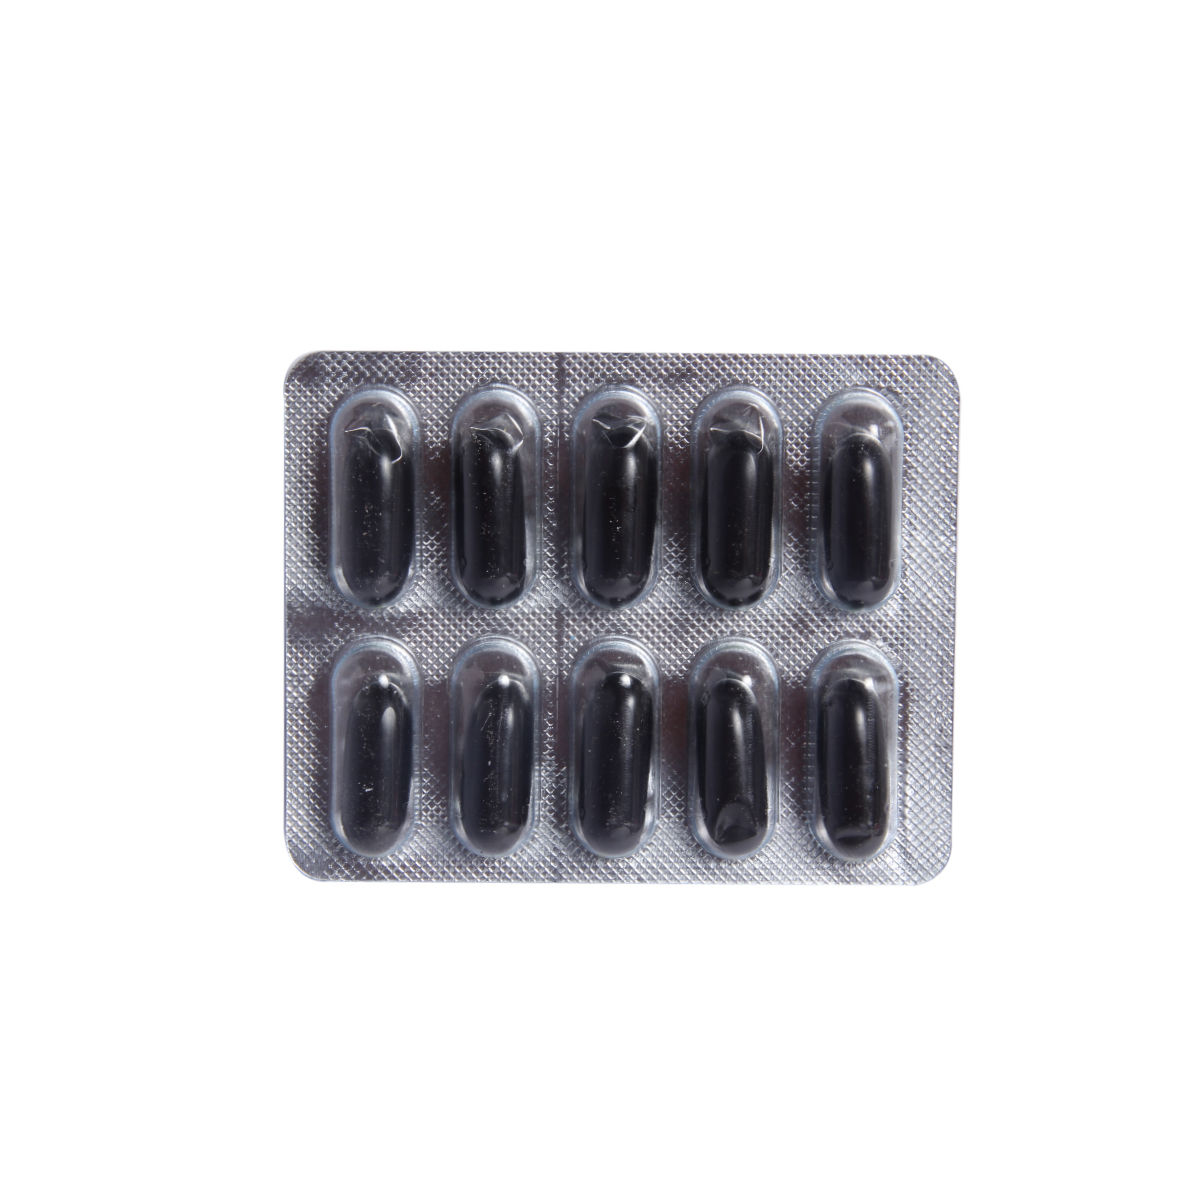 Superb-QP Capsule 10's, Pack of 10 S